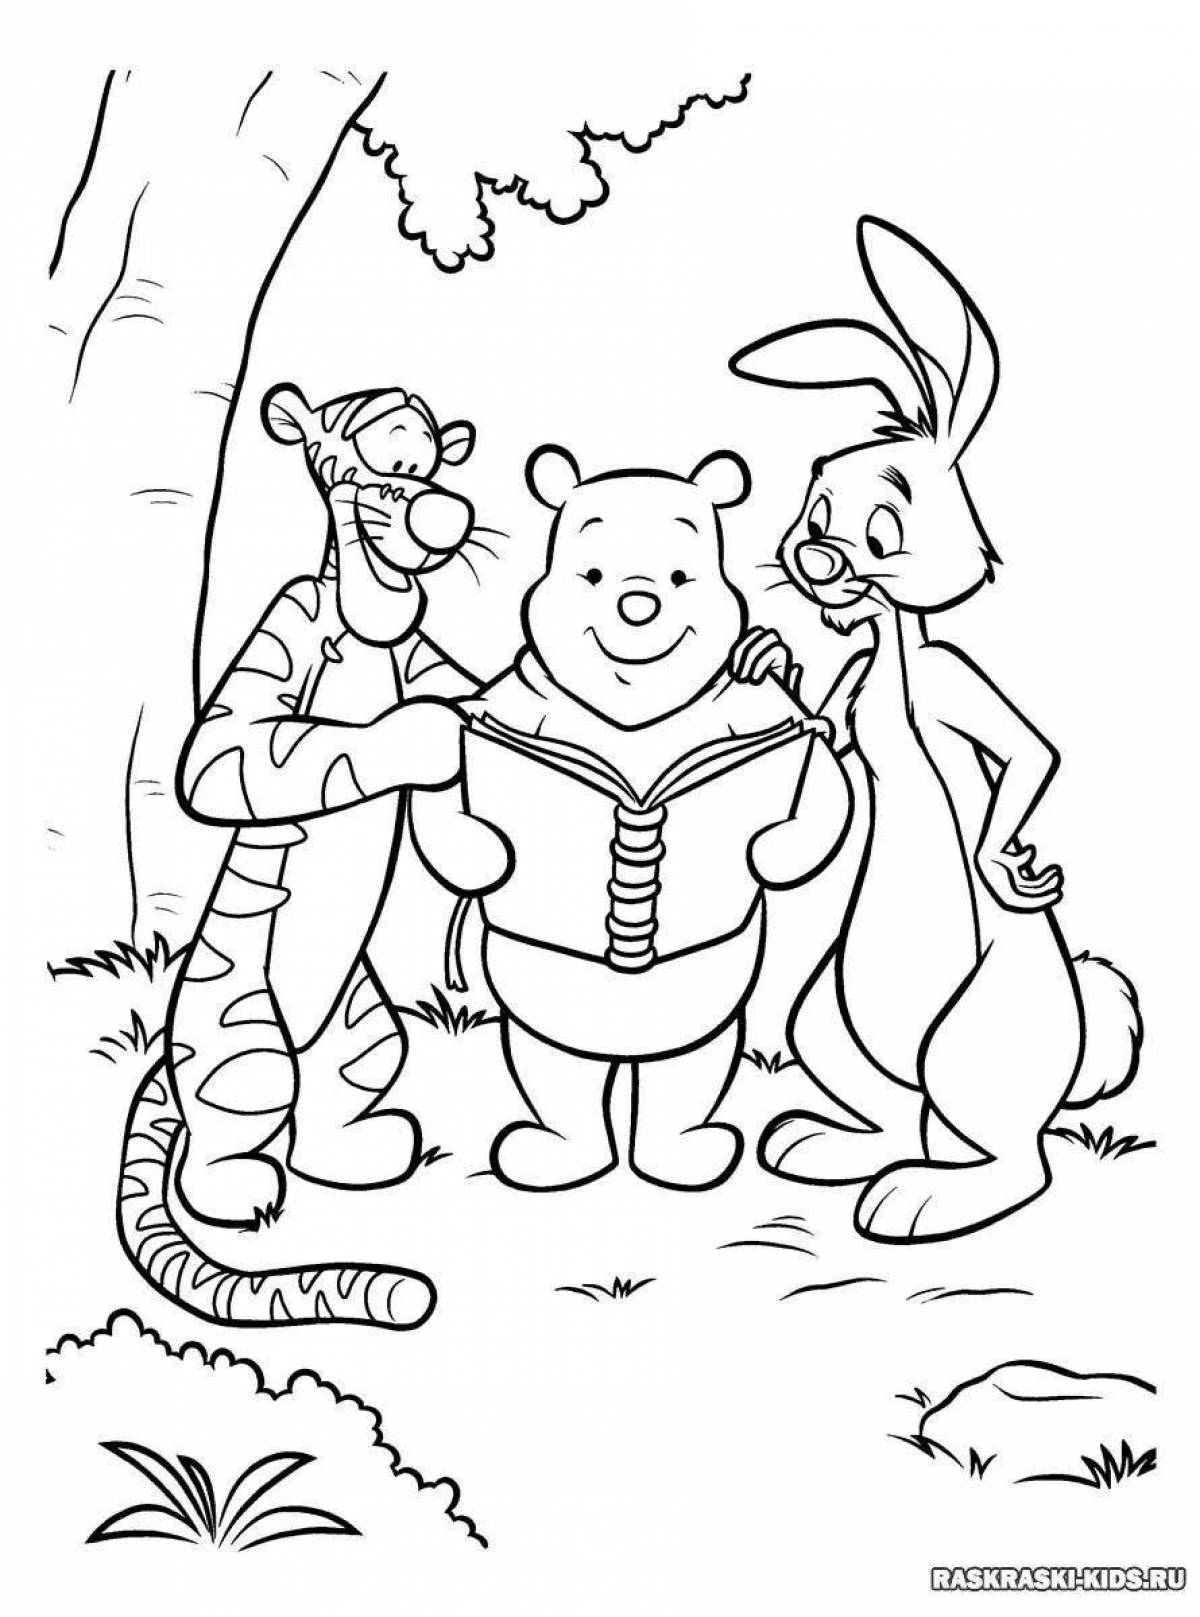 Coloring page happy winnie the pooh and his friends